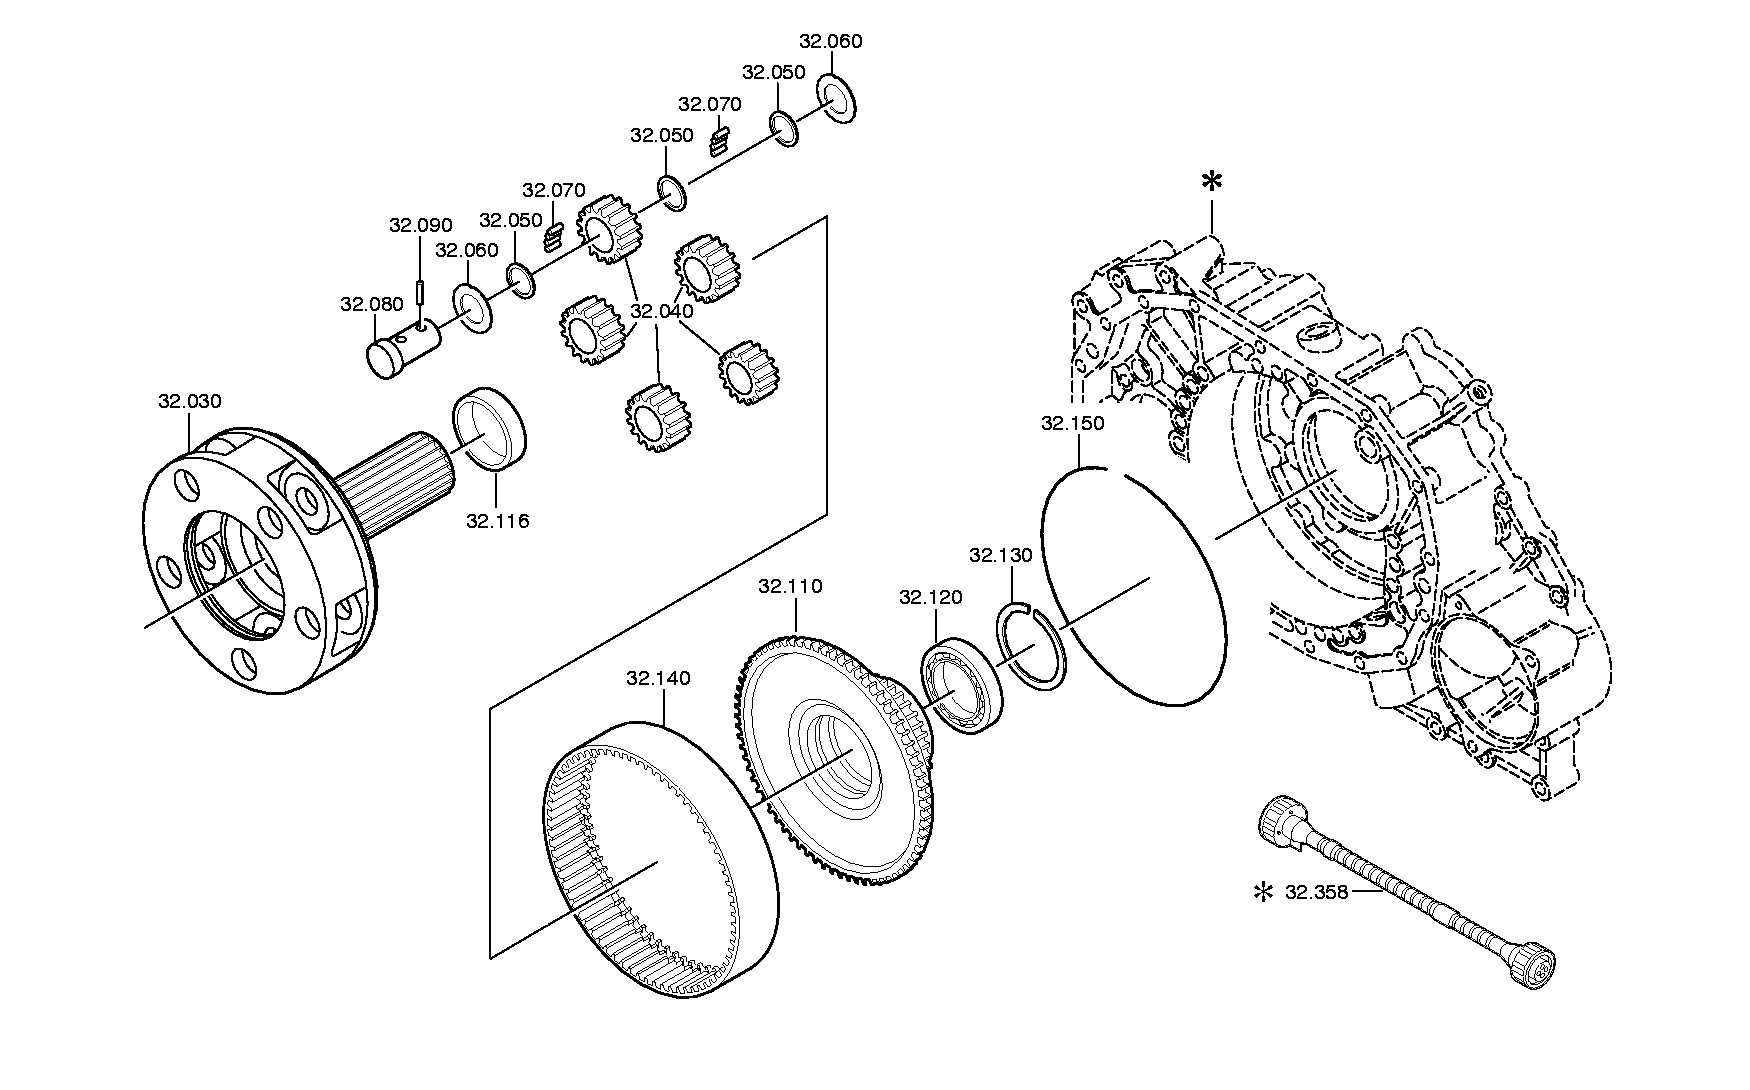 drawing for ALVIS VICKERS LTD. 1905286 - BALL BEARING (figure 4)